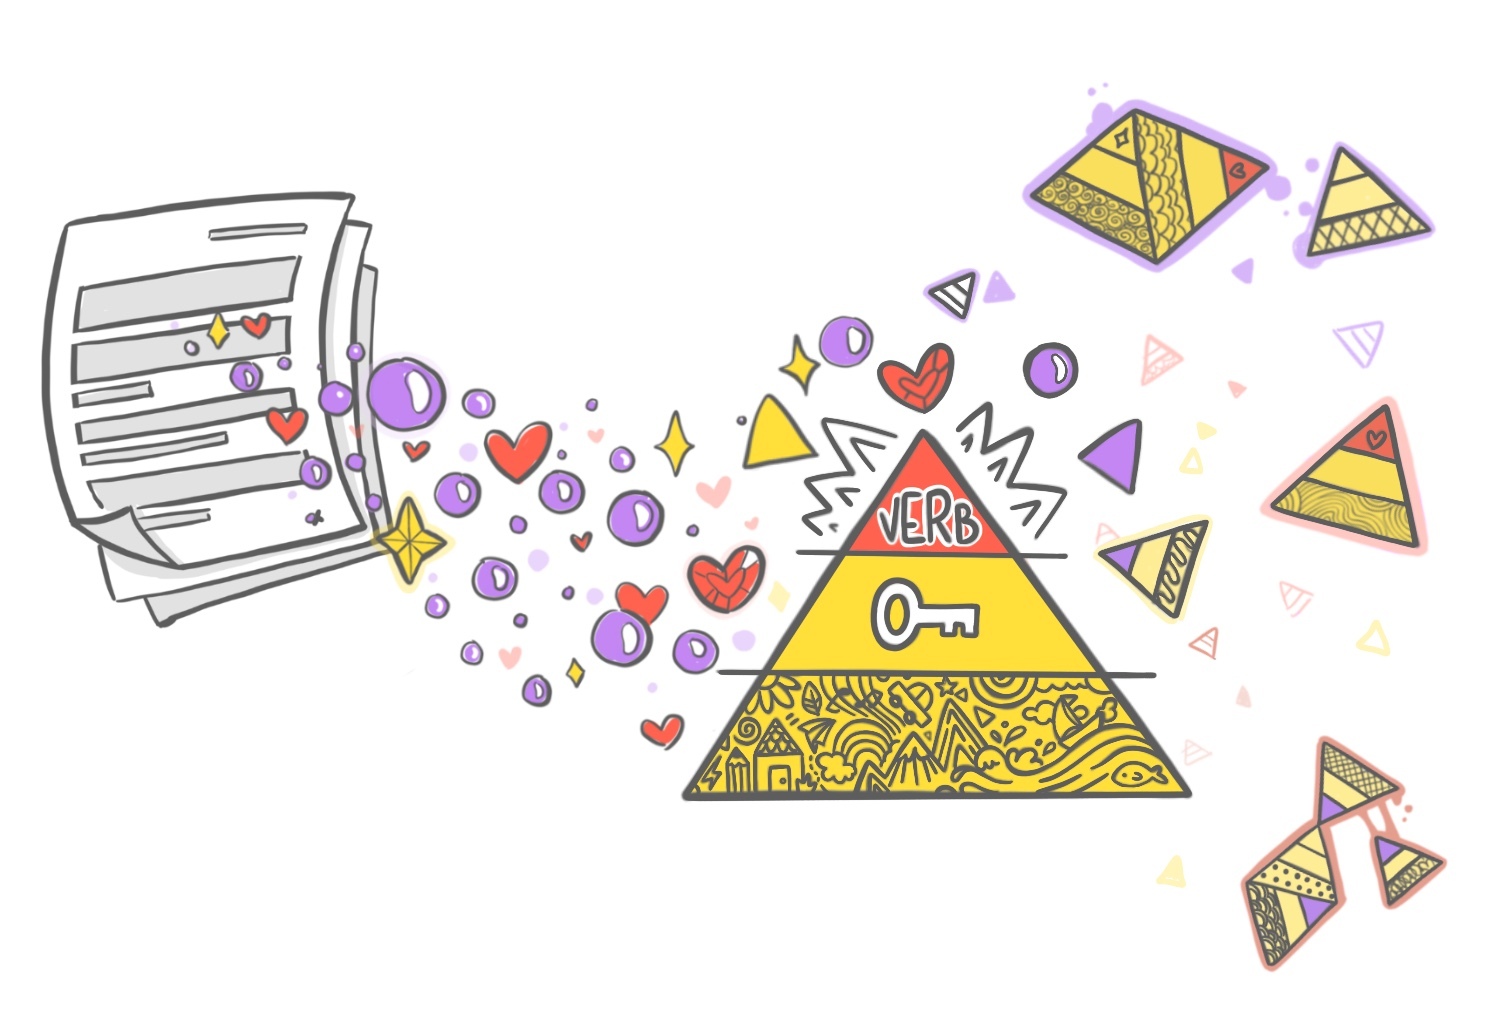 illustration of a transcript with three types of concepts coming out of it (a purple looking glass for inner thinking, a red heart for emotional reactions, a compass start for guiding principles) and being formed into summaries (shown as a triangle with a verb at the top point, a key next, and a foundation layer of supporting details), which then find affinity for each other by people's focus of mental attention (shown as these various triangles being attracted to each other)